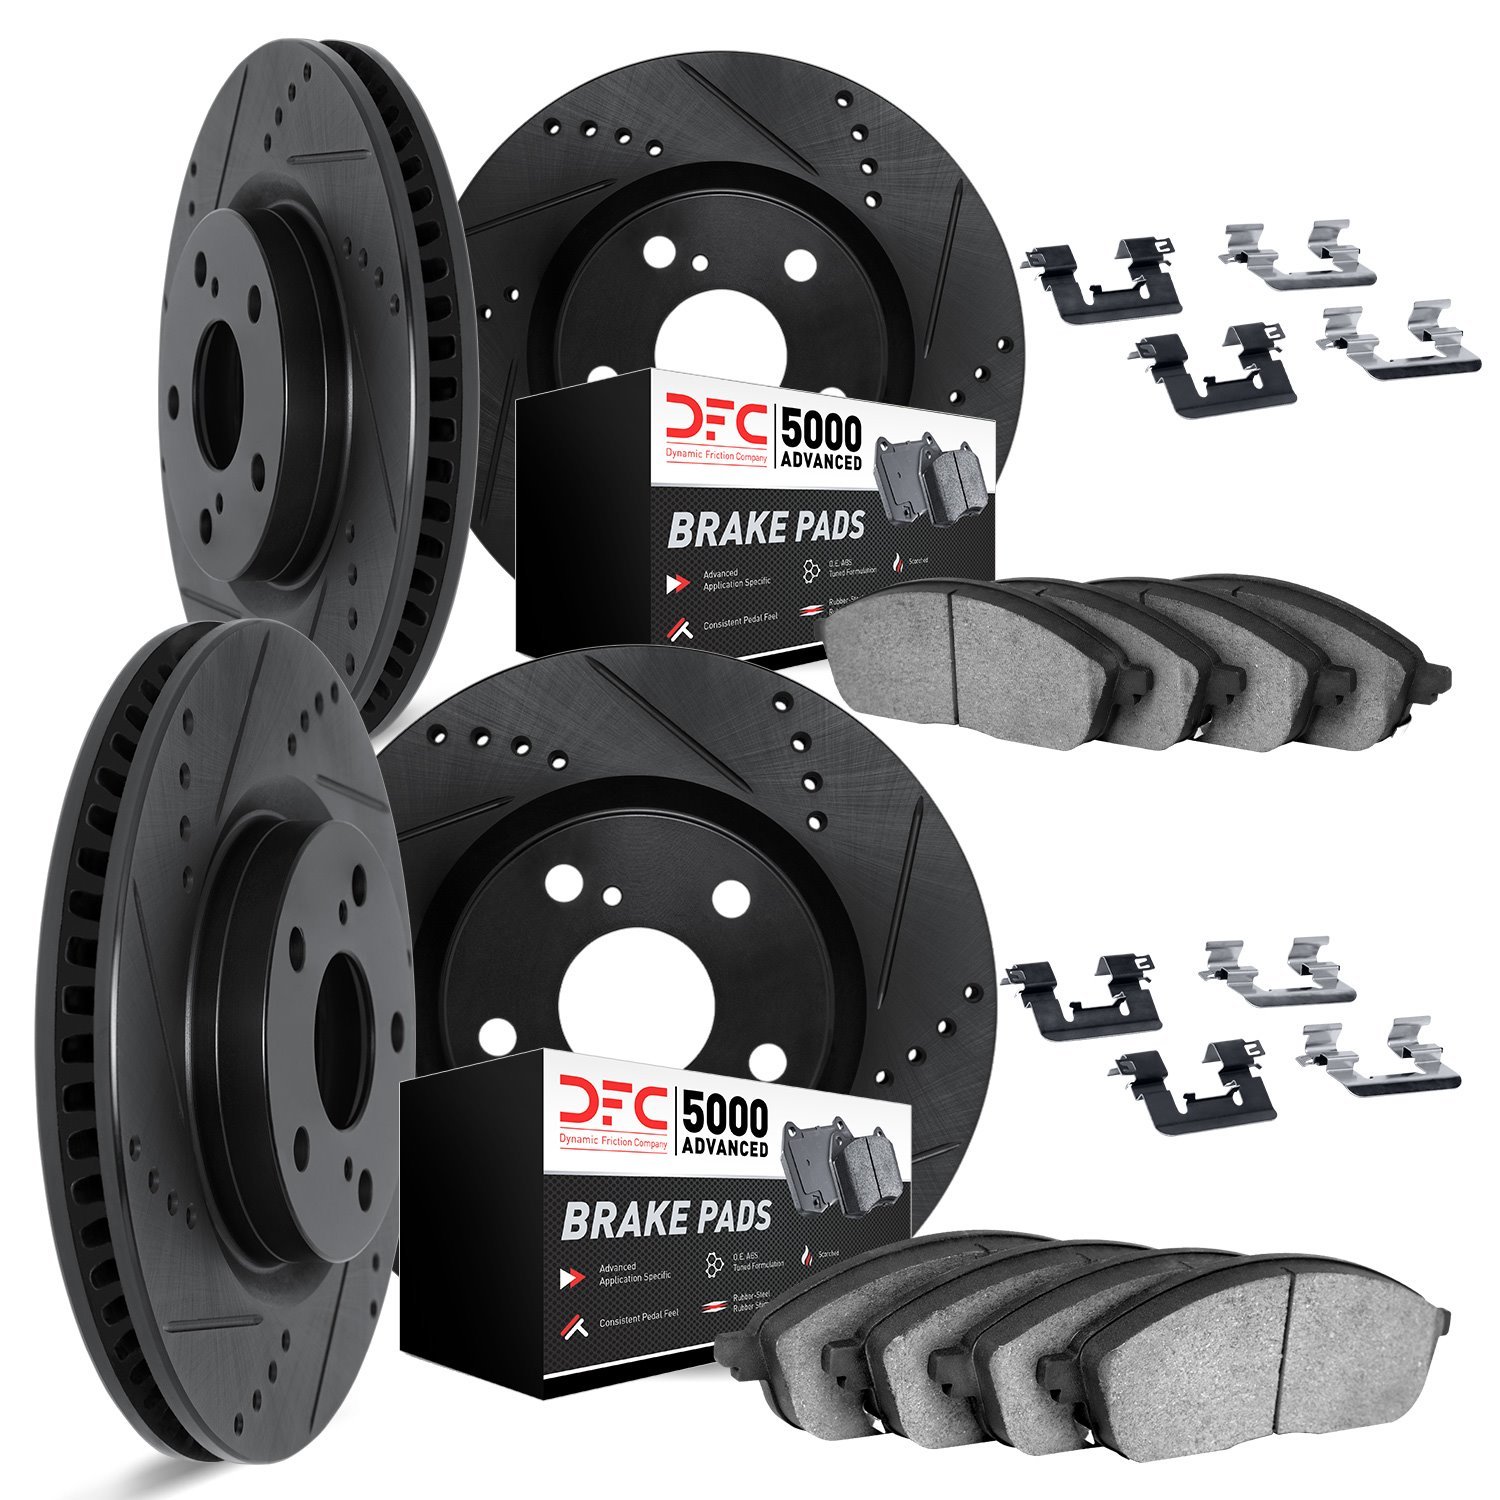 8514-31010 Drilled/Slotted Brake Rotors w/5000 Advanced Brake Pads Kit & Hardware [Black], 2008-2010 BMW, Position: Front and Re